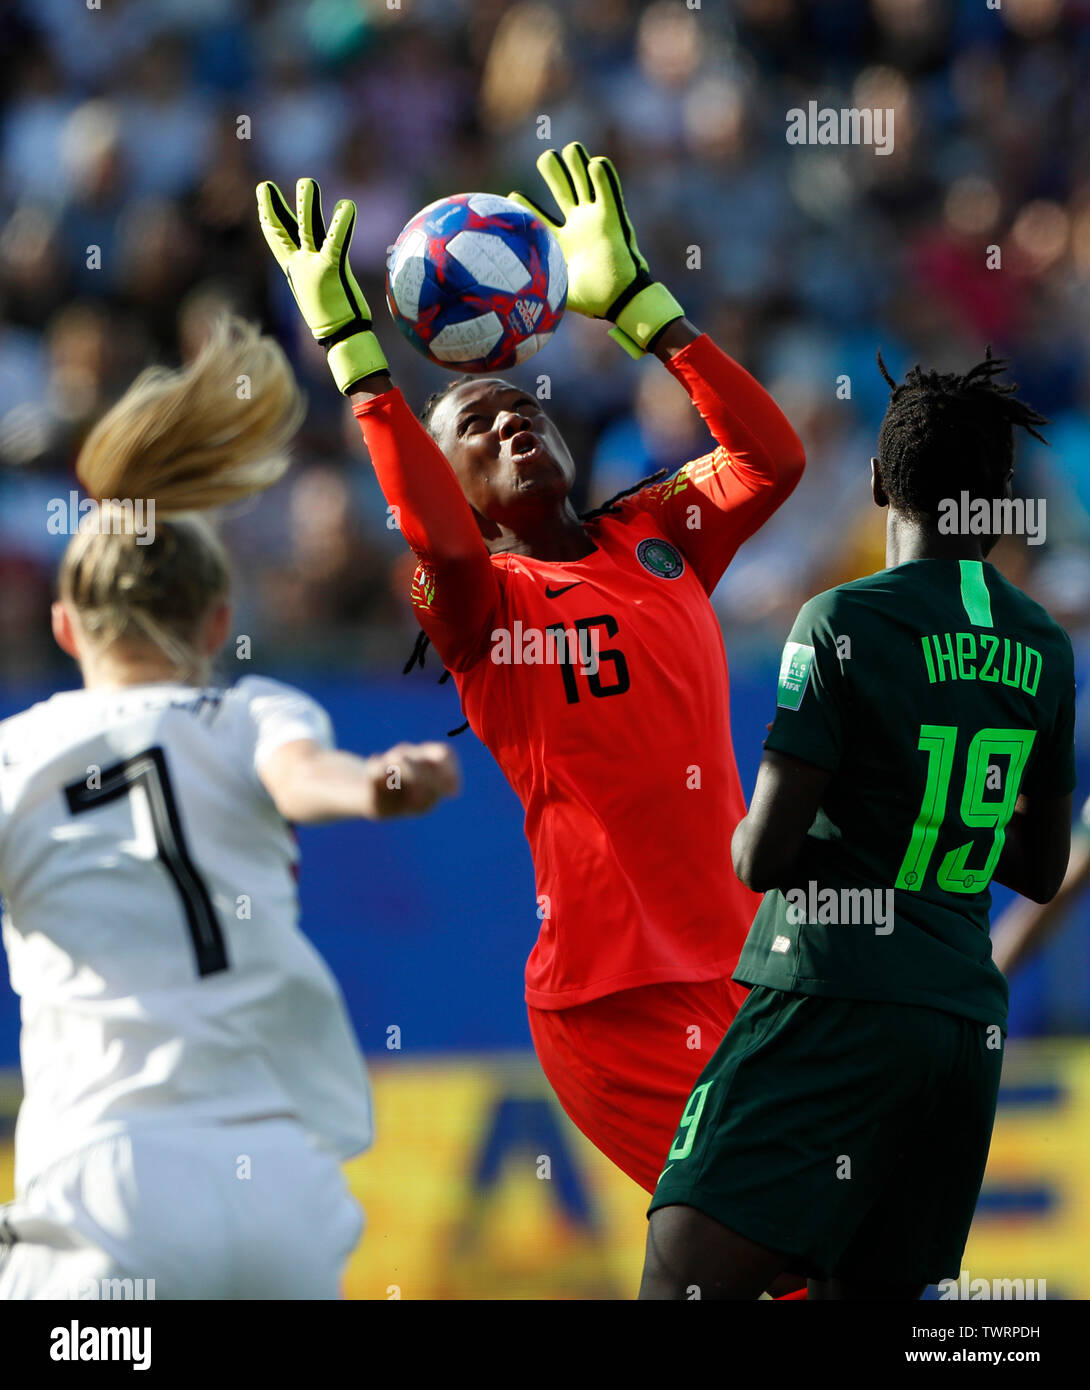 Grenoble, France. 22nd June, 2019. Goalkeeper Chiamaka Nnadozie (C) of Nigeria makes a save during the round of 16 match against Germany at the 2019 FIFA Women's World Cup at Stade des Alpes in Grenoble, France, June 22, 2019. Credit: Ding Xu/Xinhua/Alamy Live News Stock Photo